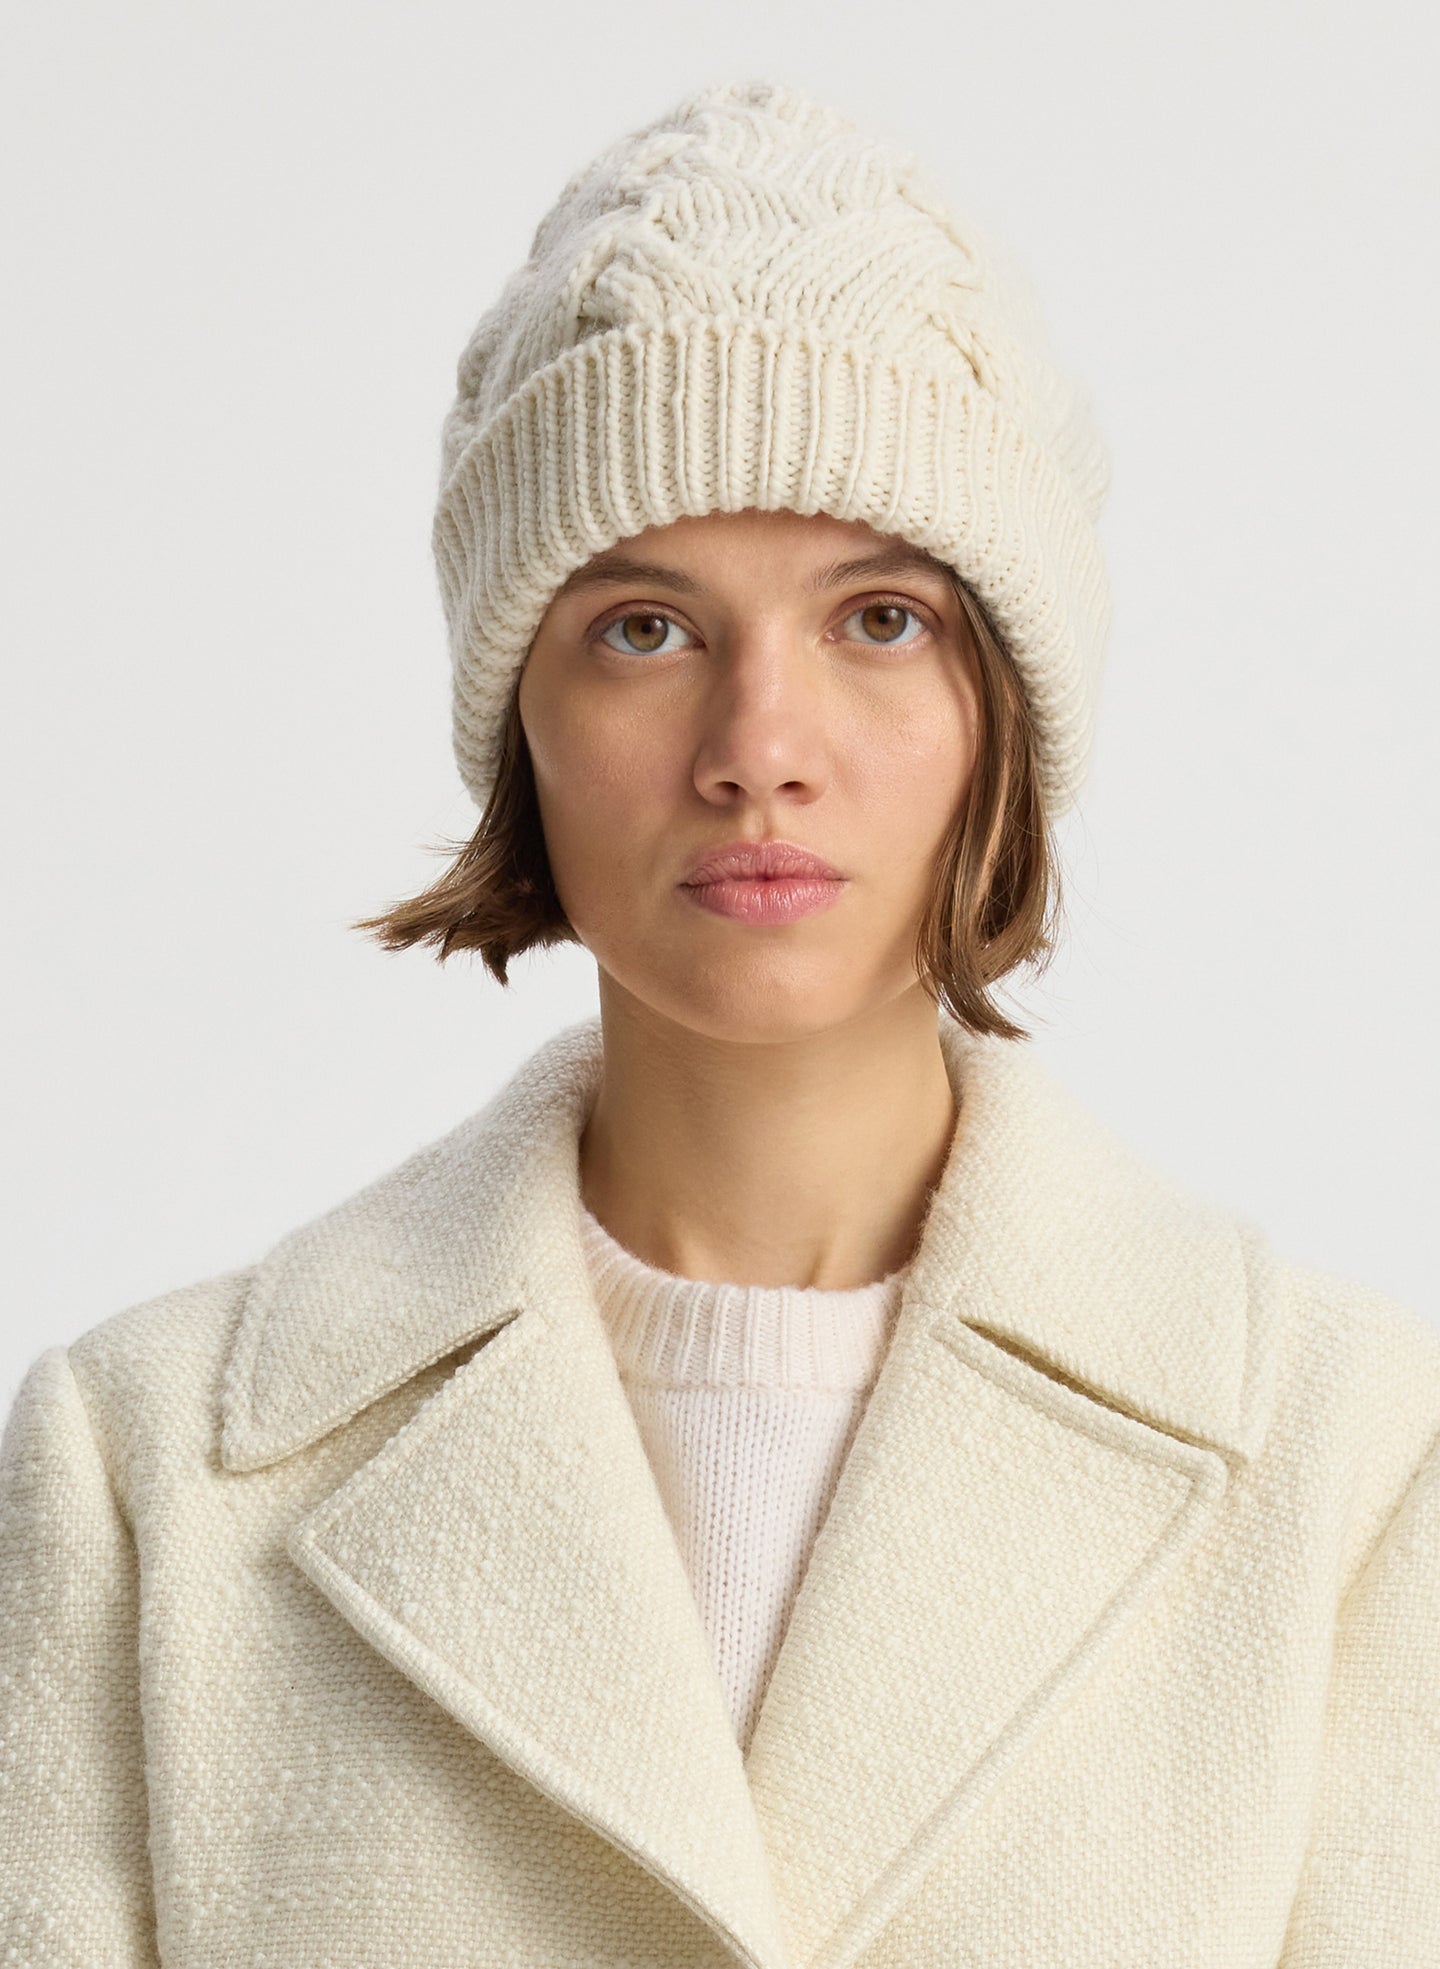 Front view of woman wearing cream cable knit beanie